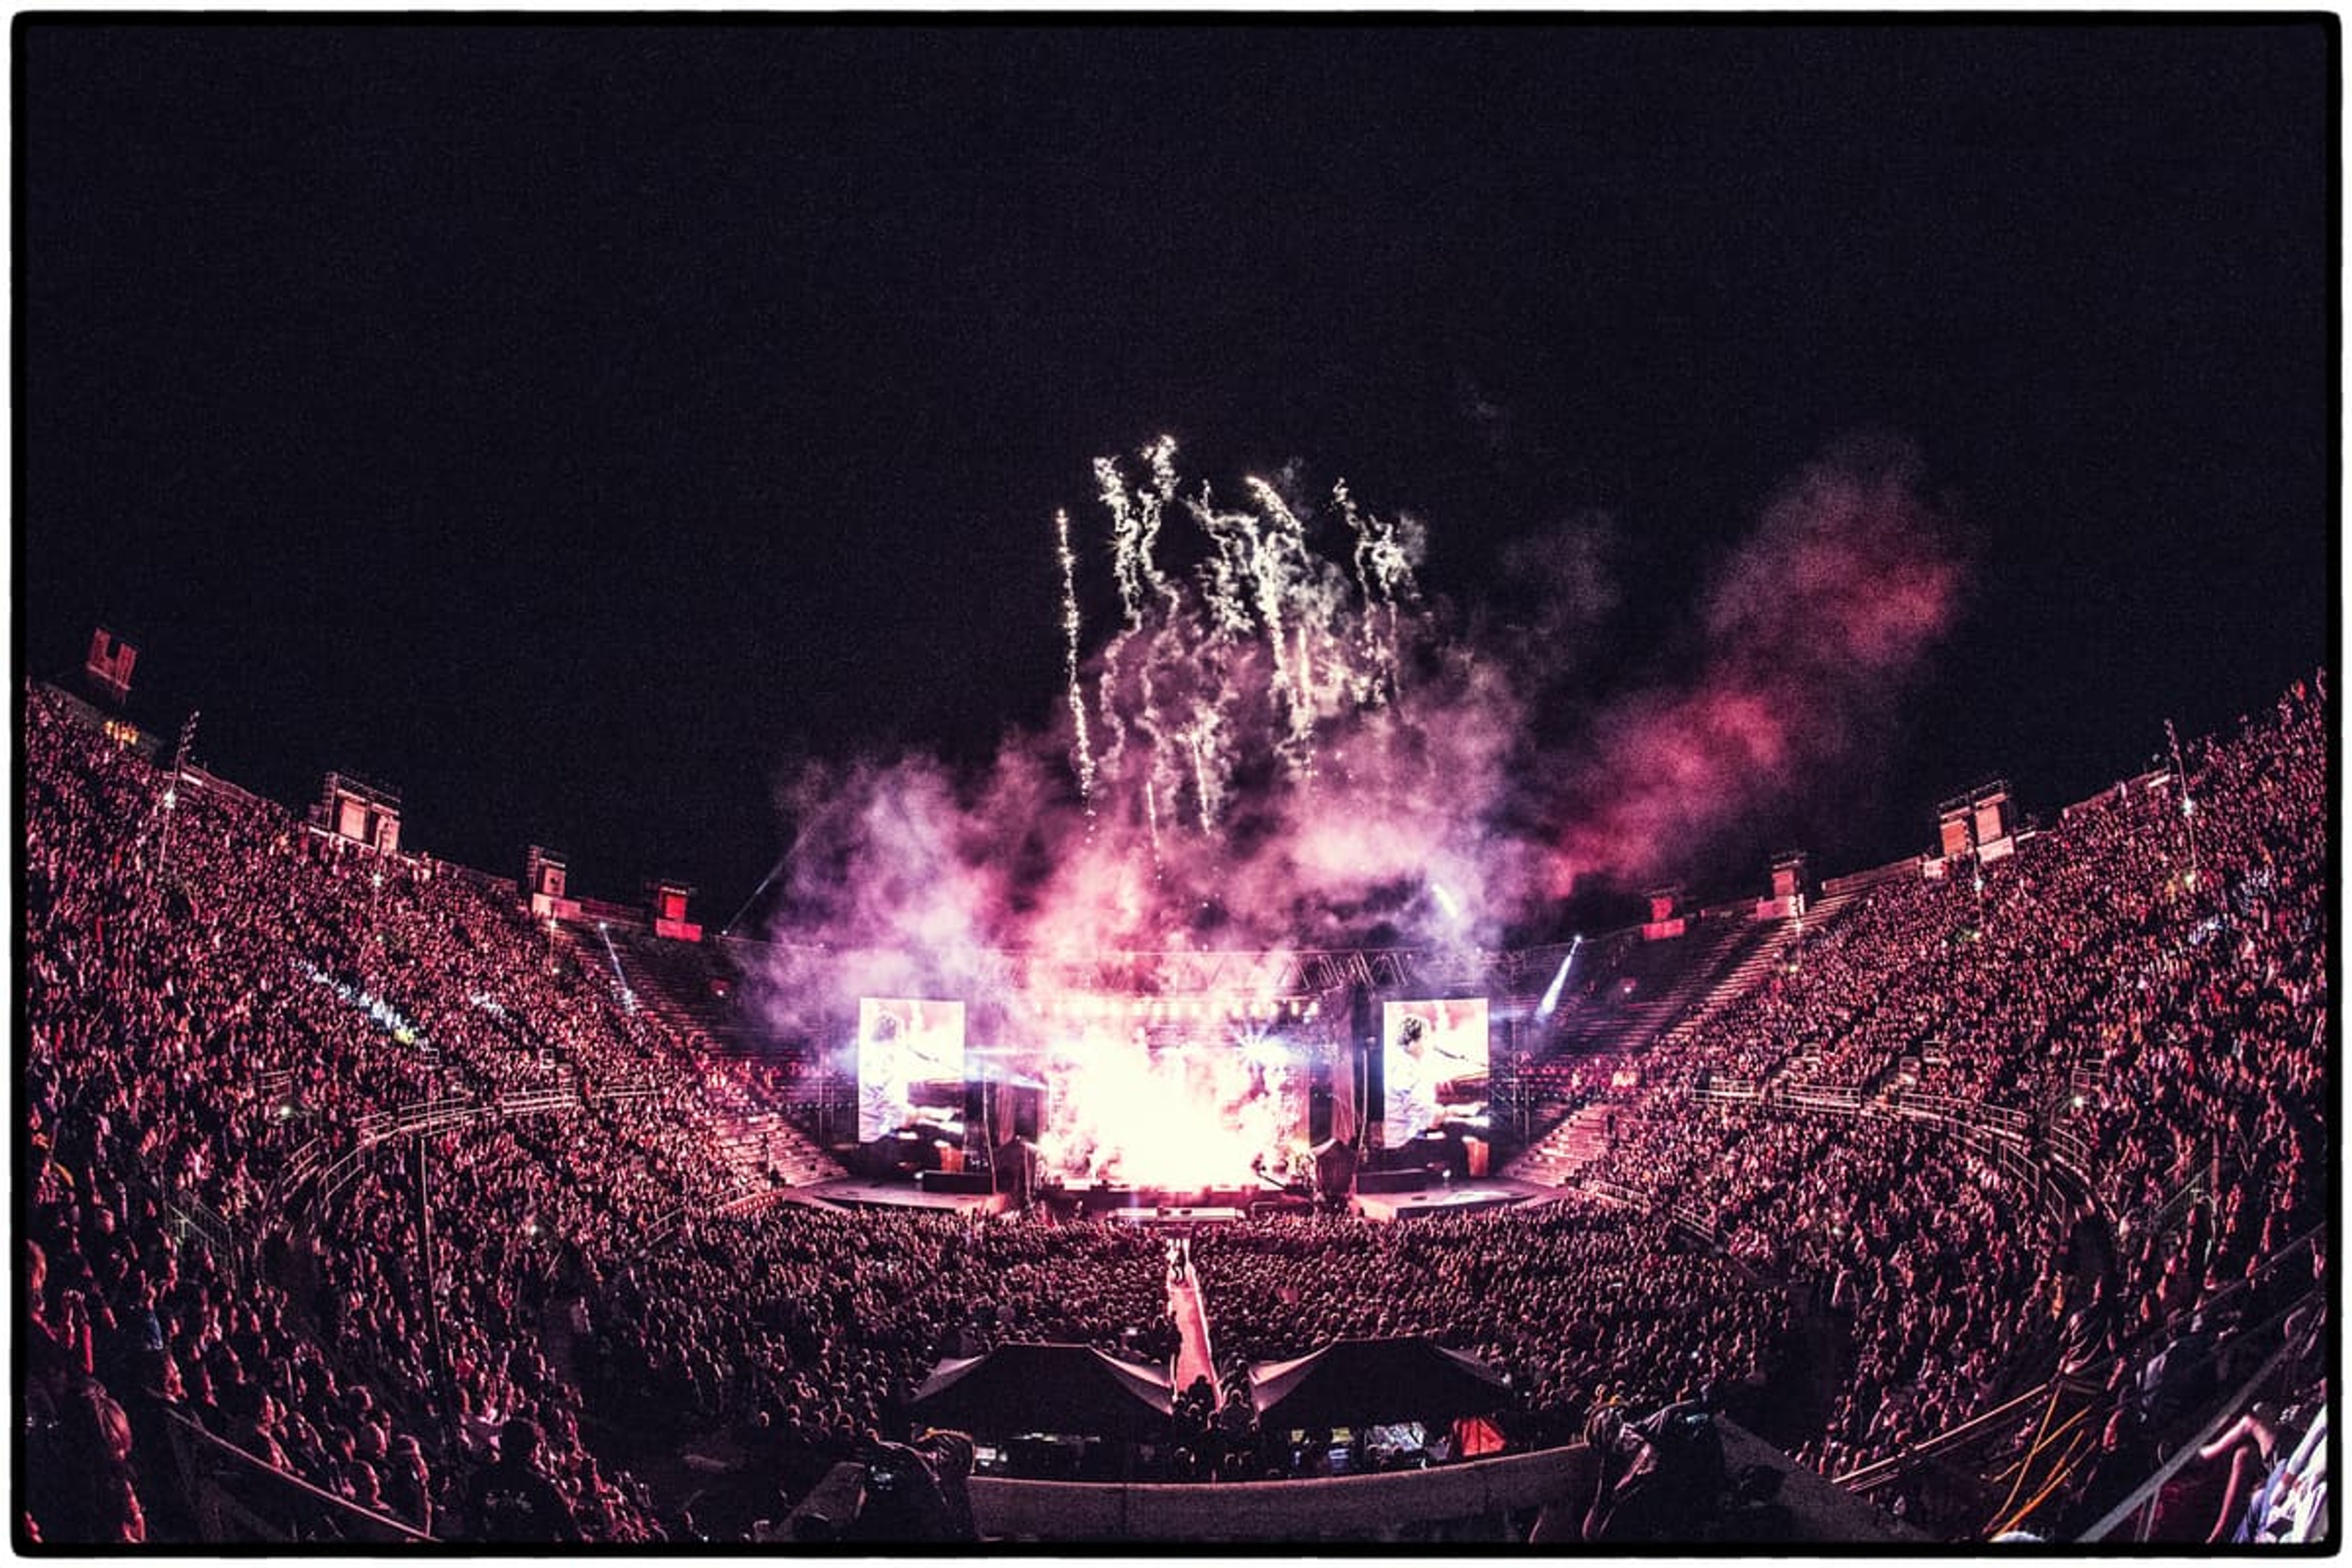 Paul and the band performing 'Live and Let Die', Roman Amphitheatre, Verona, June 25th 2013